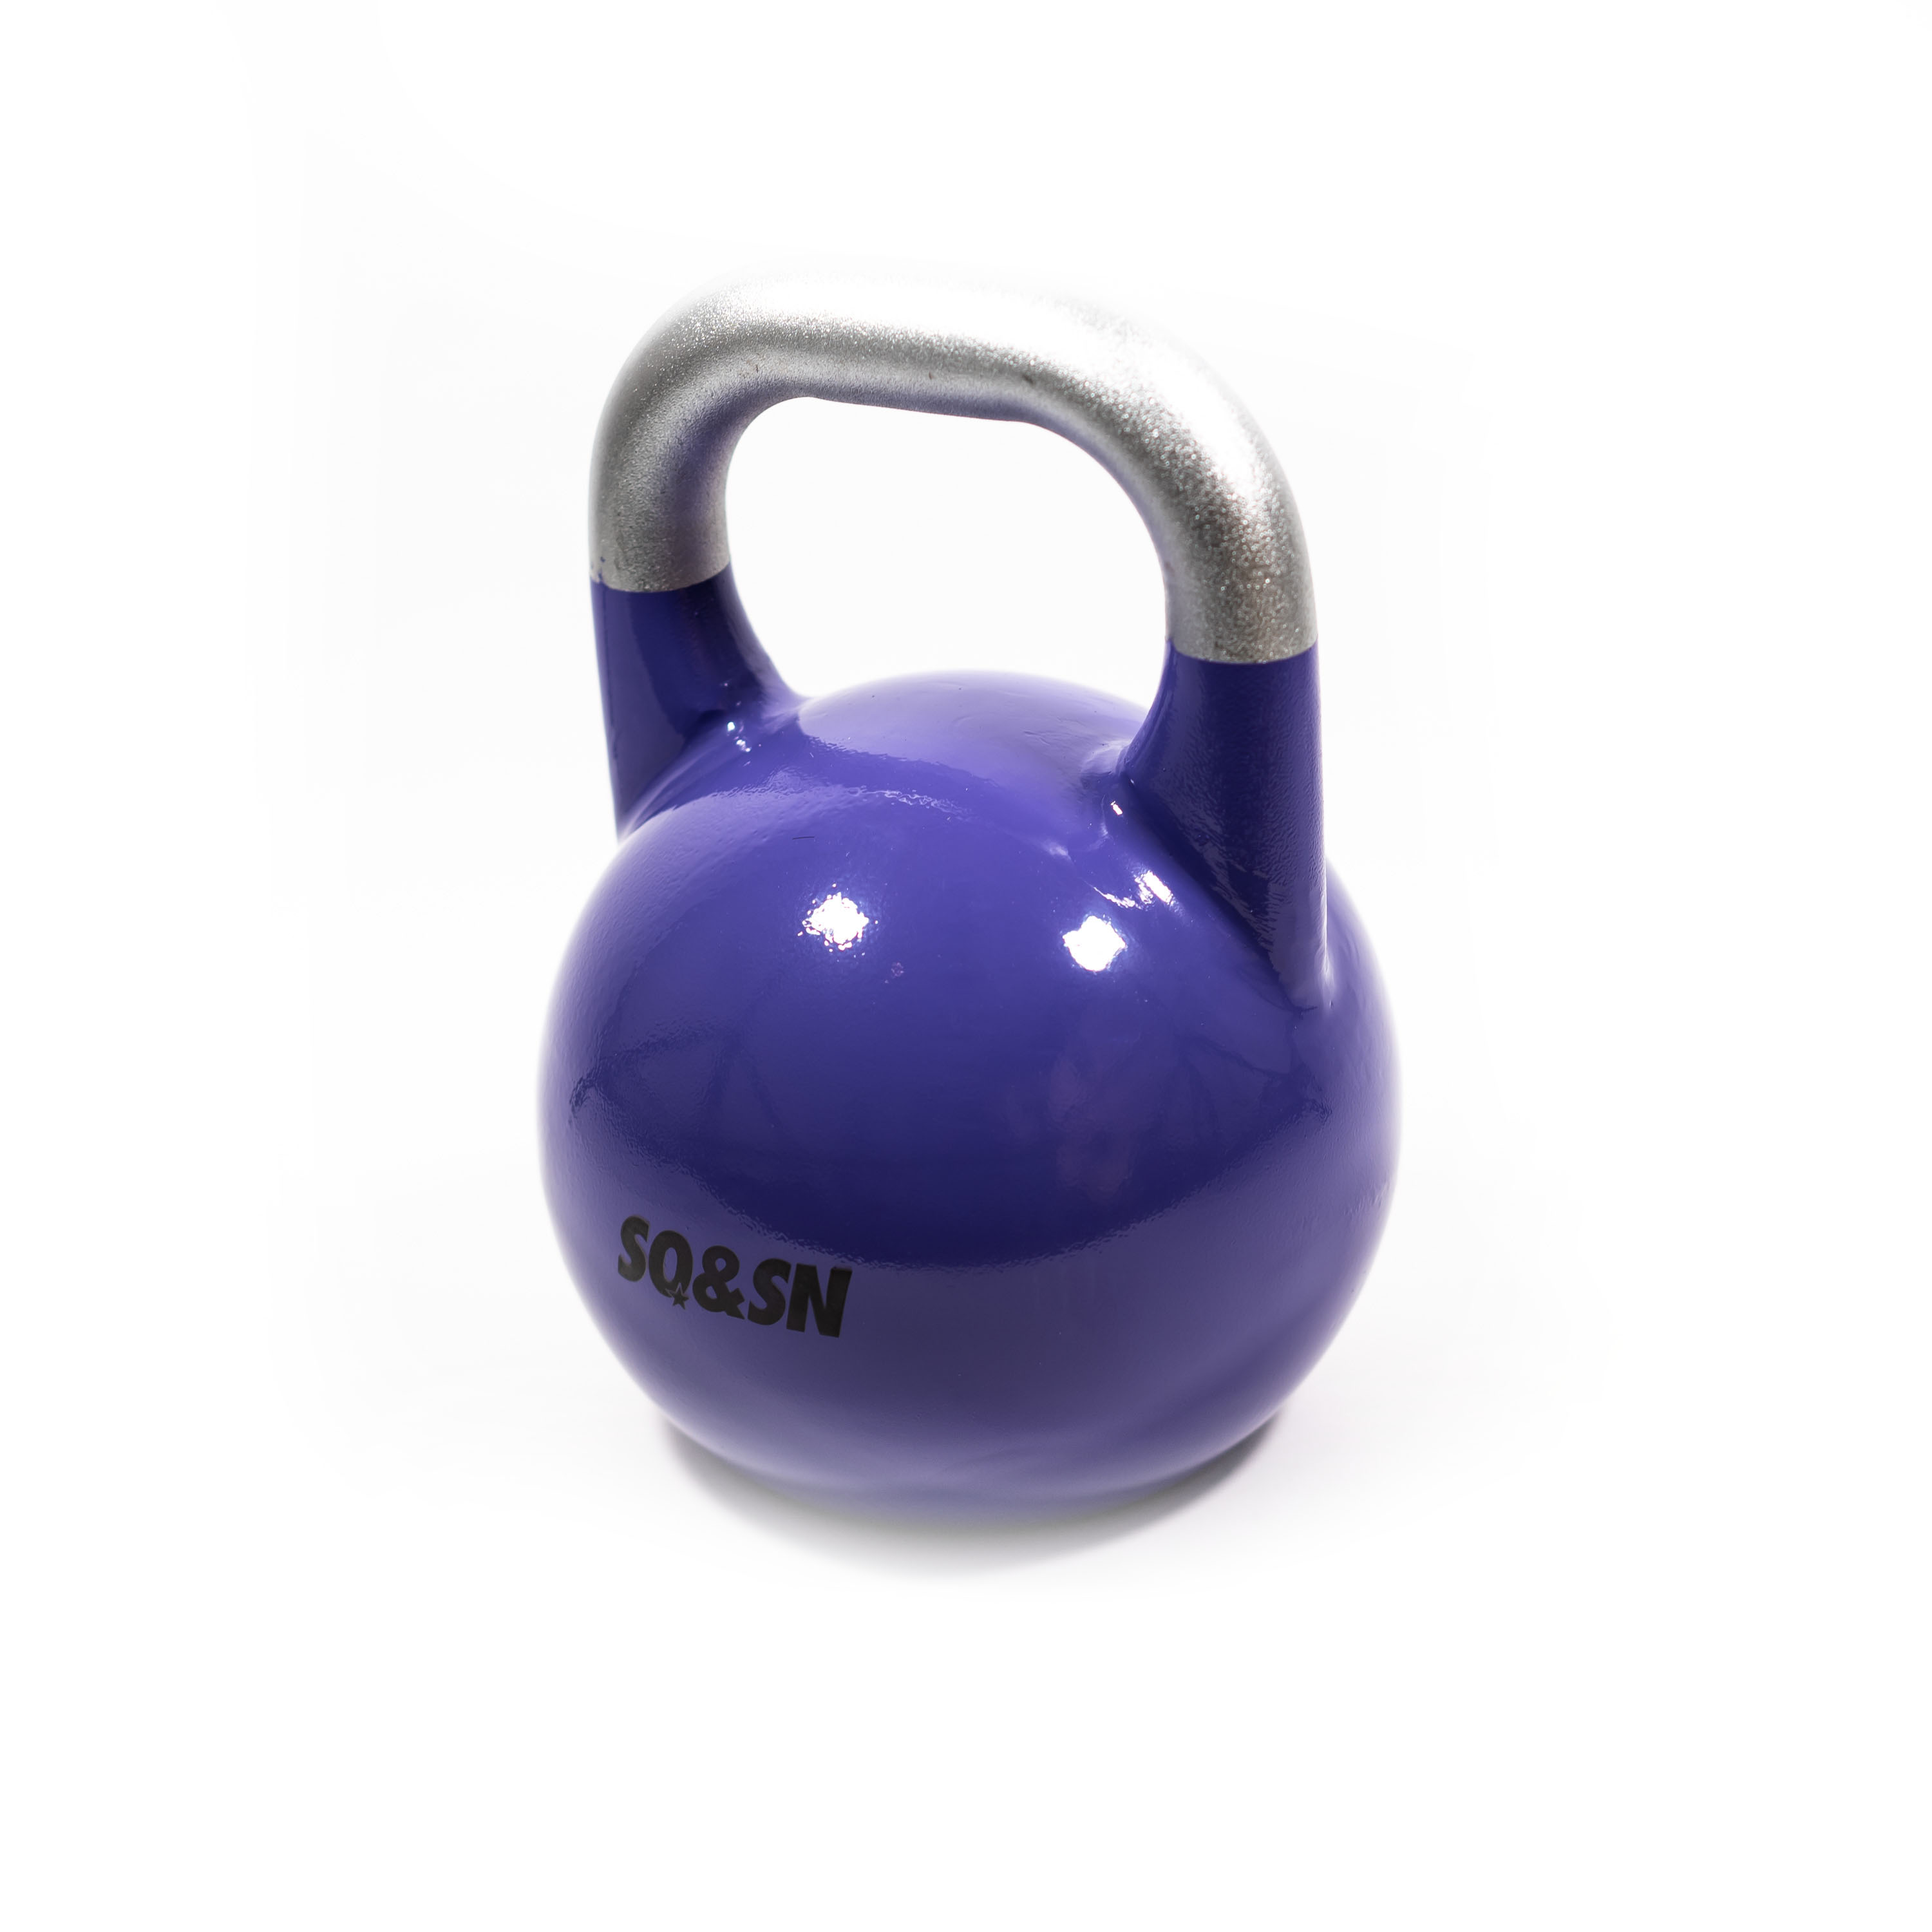 SQ&SN Competition Kettlebell 20 kg - Demo thumbnail